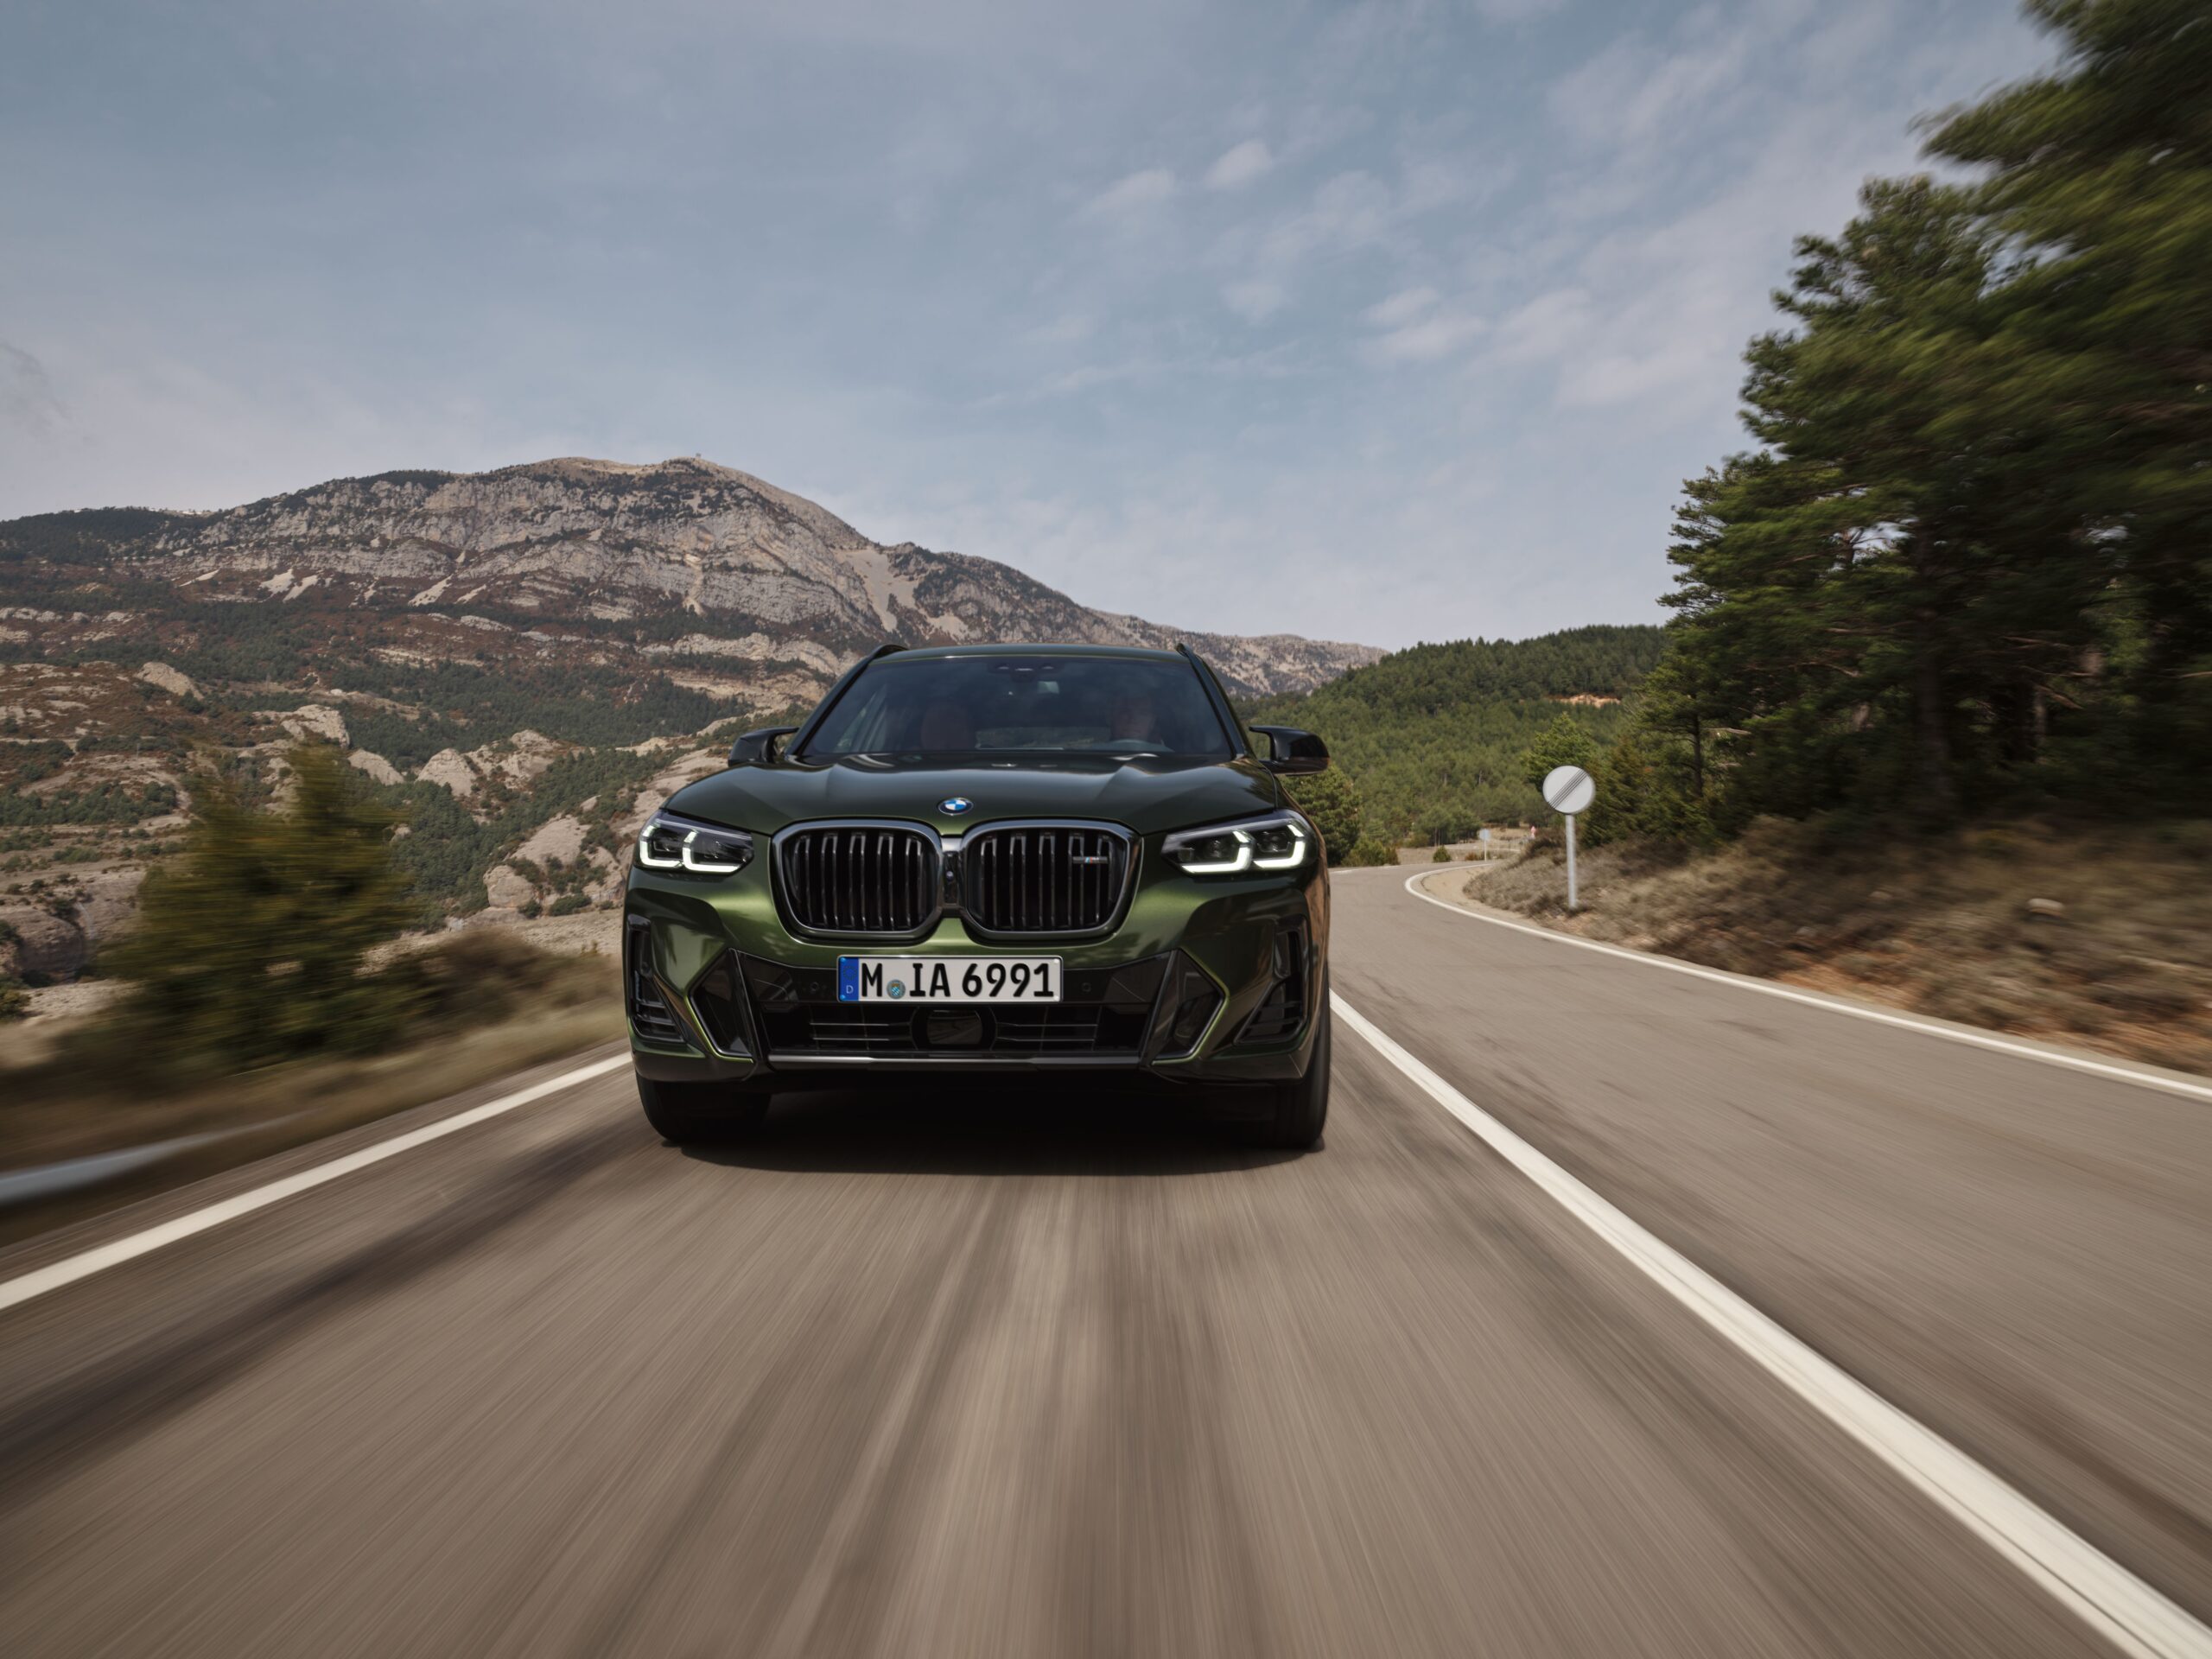 The first-ever BMW X3 M40i